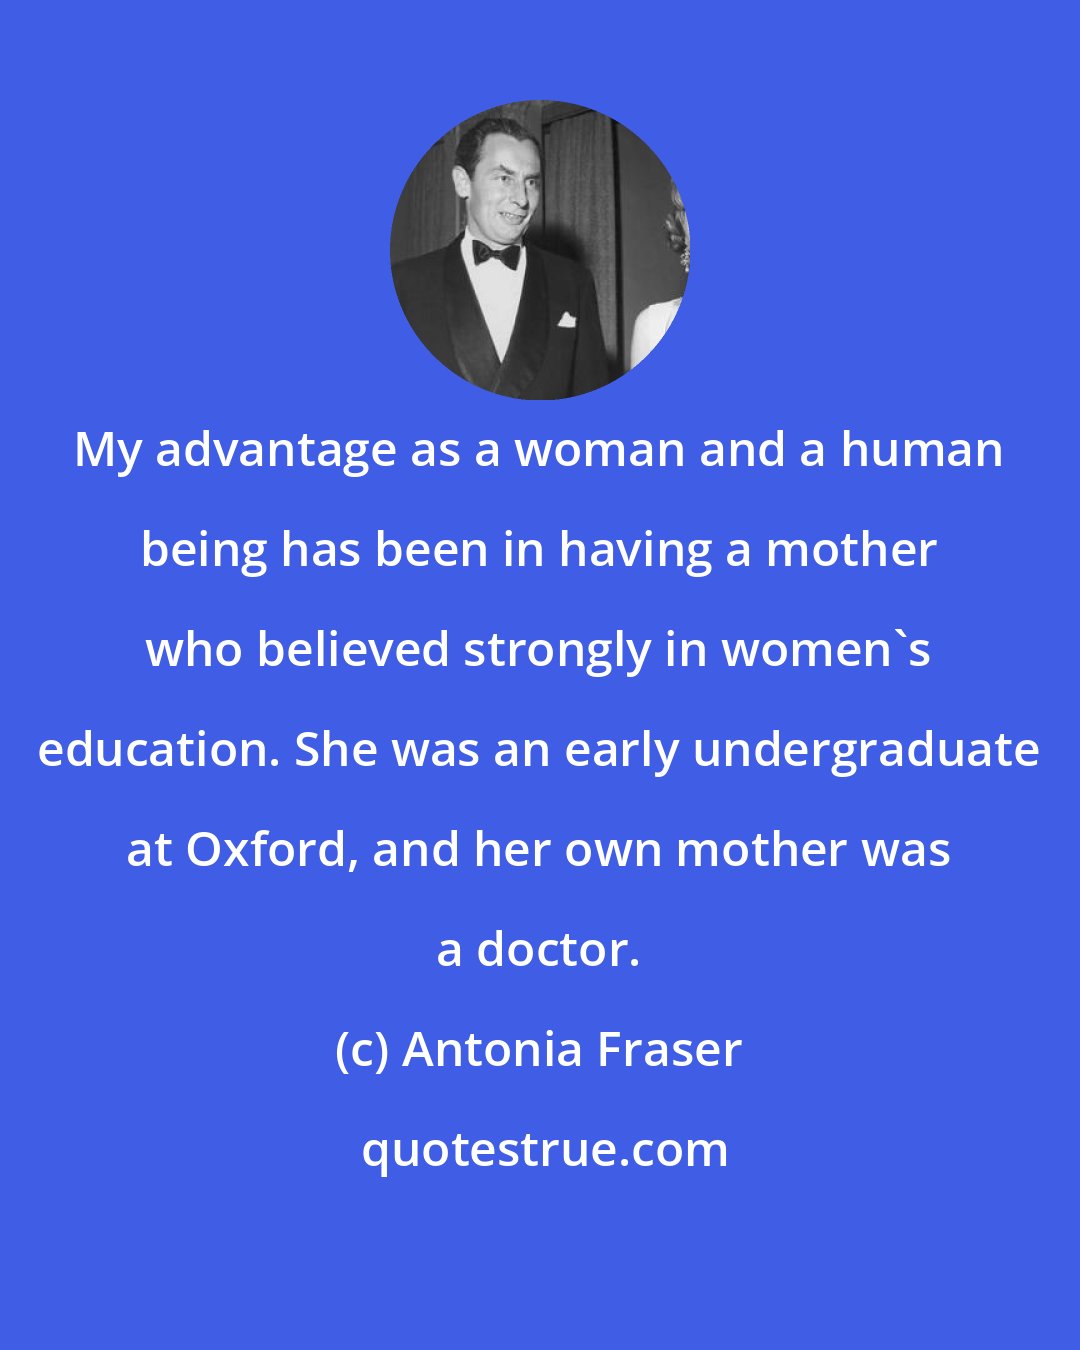 Antonia Fraser: My advantage as a woman and a human being has been in having a mother who believed strongly in women's education. She was an early undergraduate at Oxford, and her own mother was a doctor.